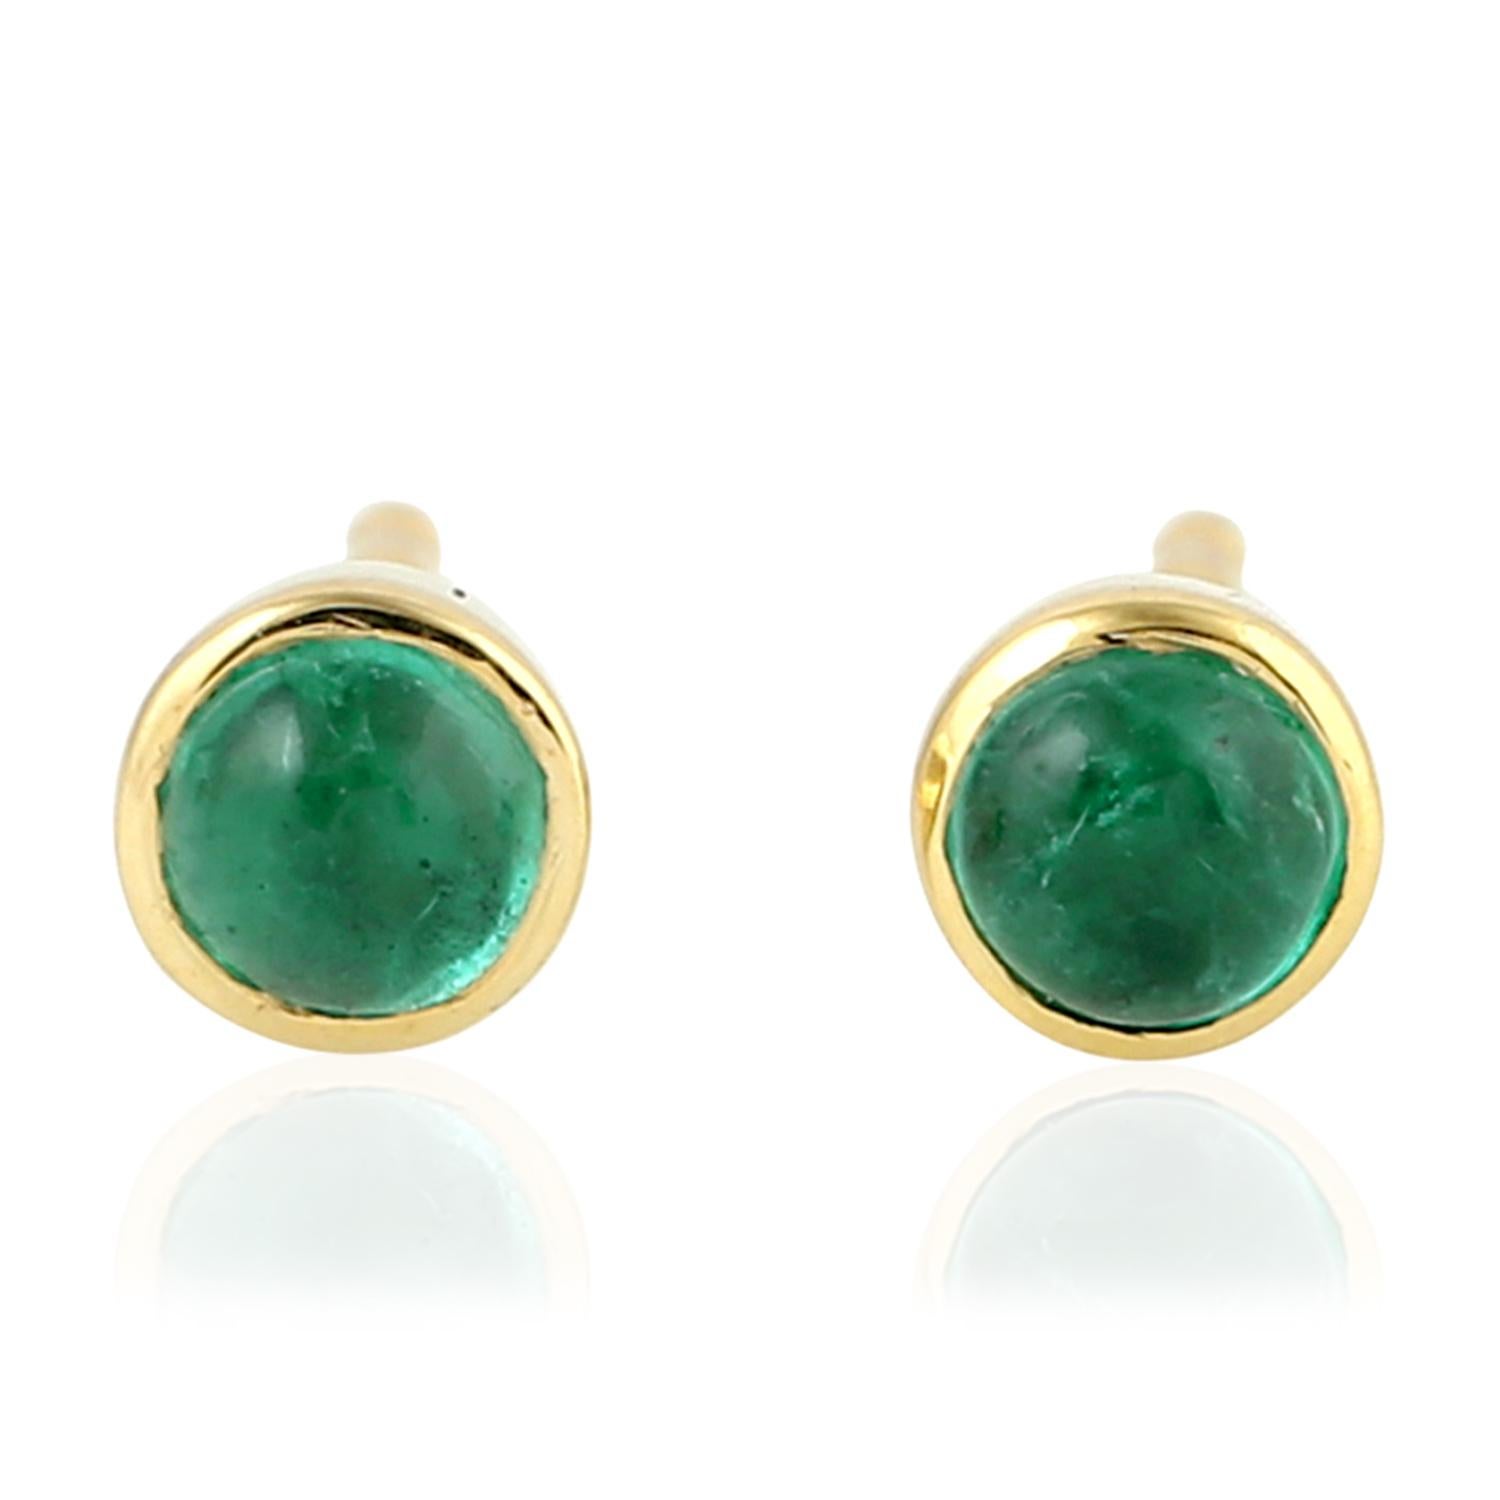 These beautiful stud earrings are handmade in 14K gold and set with .62 carats of emerald.

FOLLOW  MEGHNA JEWELS storefront to view the latest collection & exclusive pieces.  Meghna Jewels is proudly rated as a Top Seller on 1stdibs with 5 star